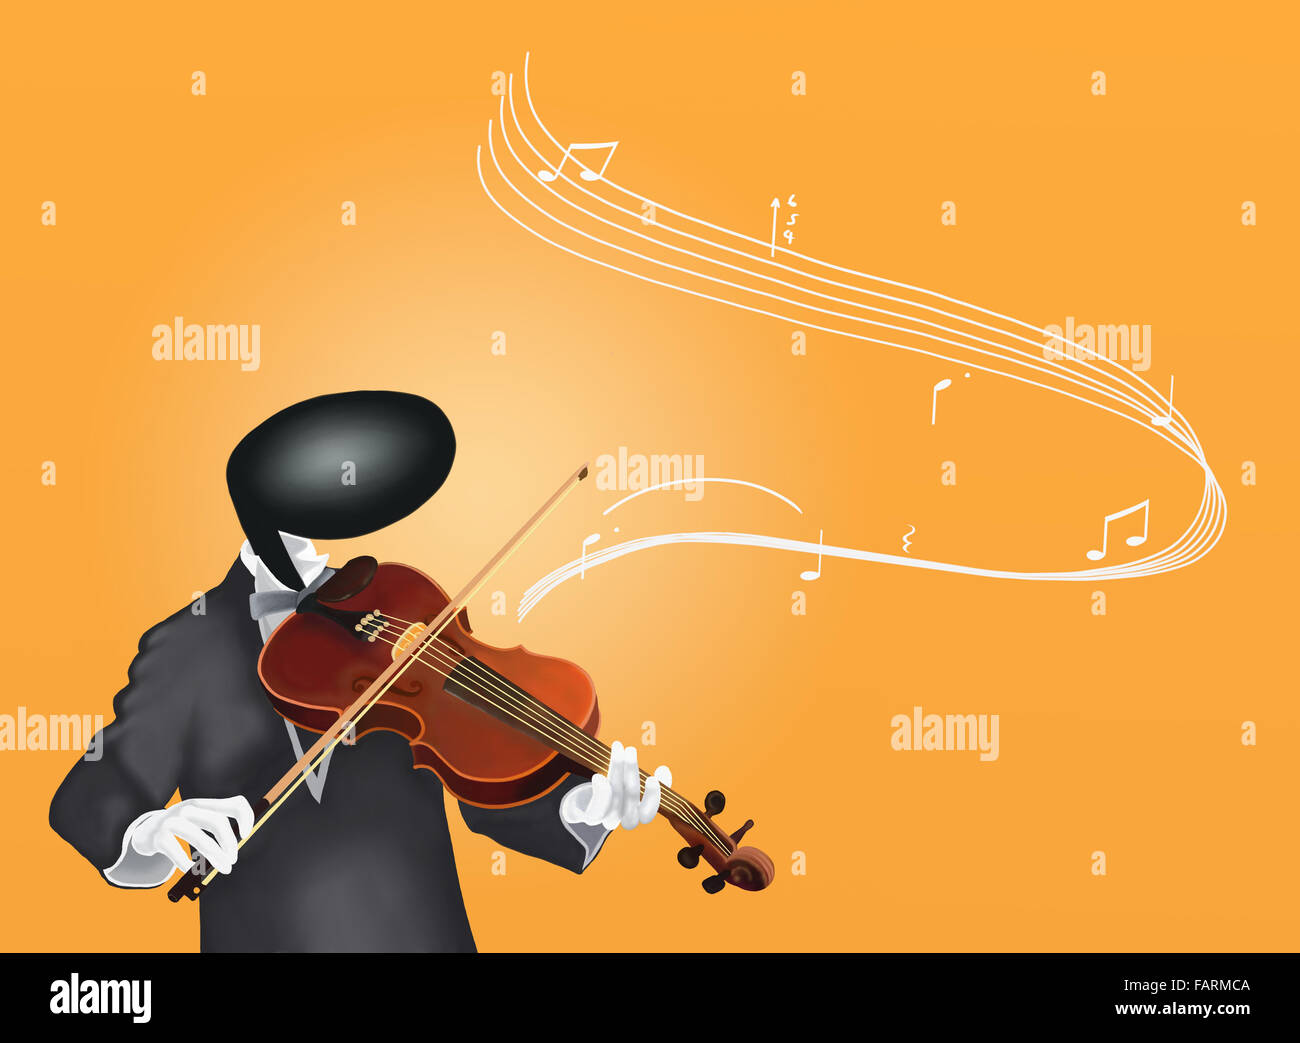 Violinist Man playing Violin with Musical Notes and Sound Waves Stock Photo  - Alamy